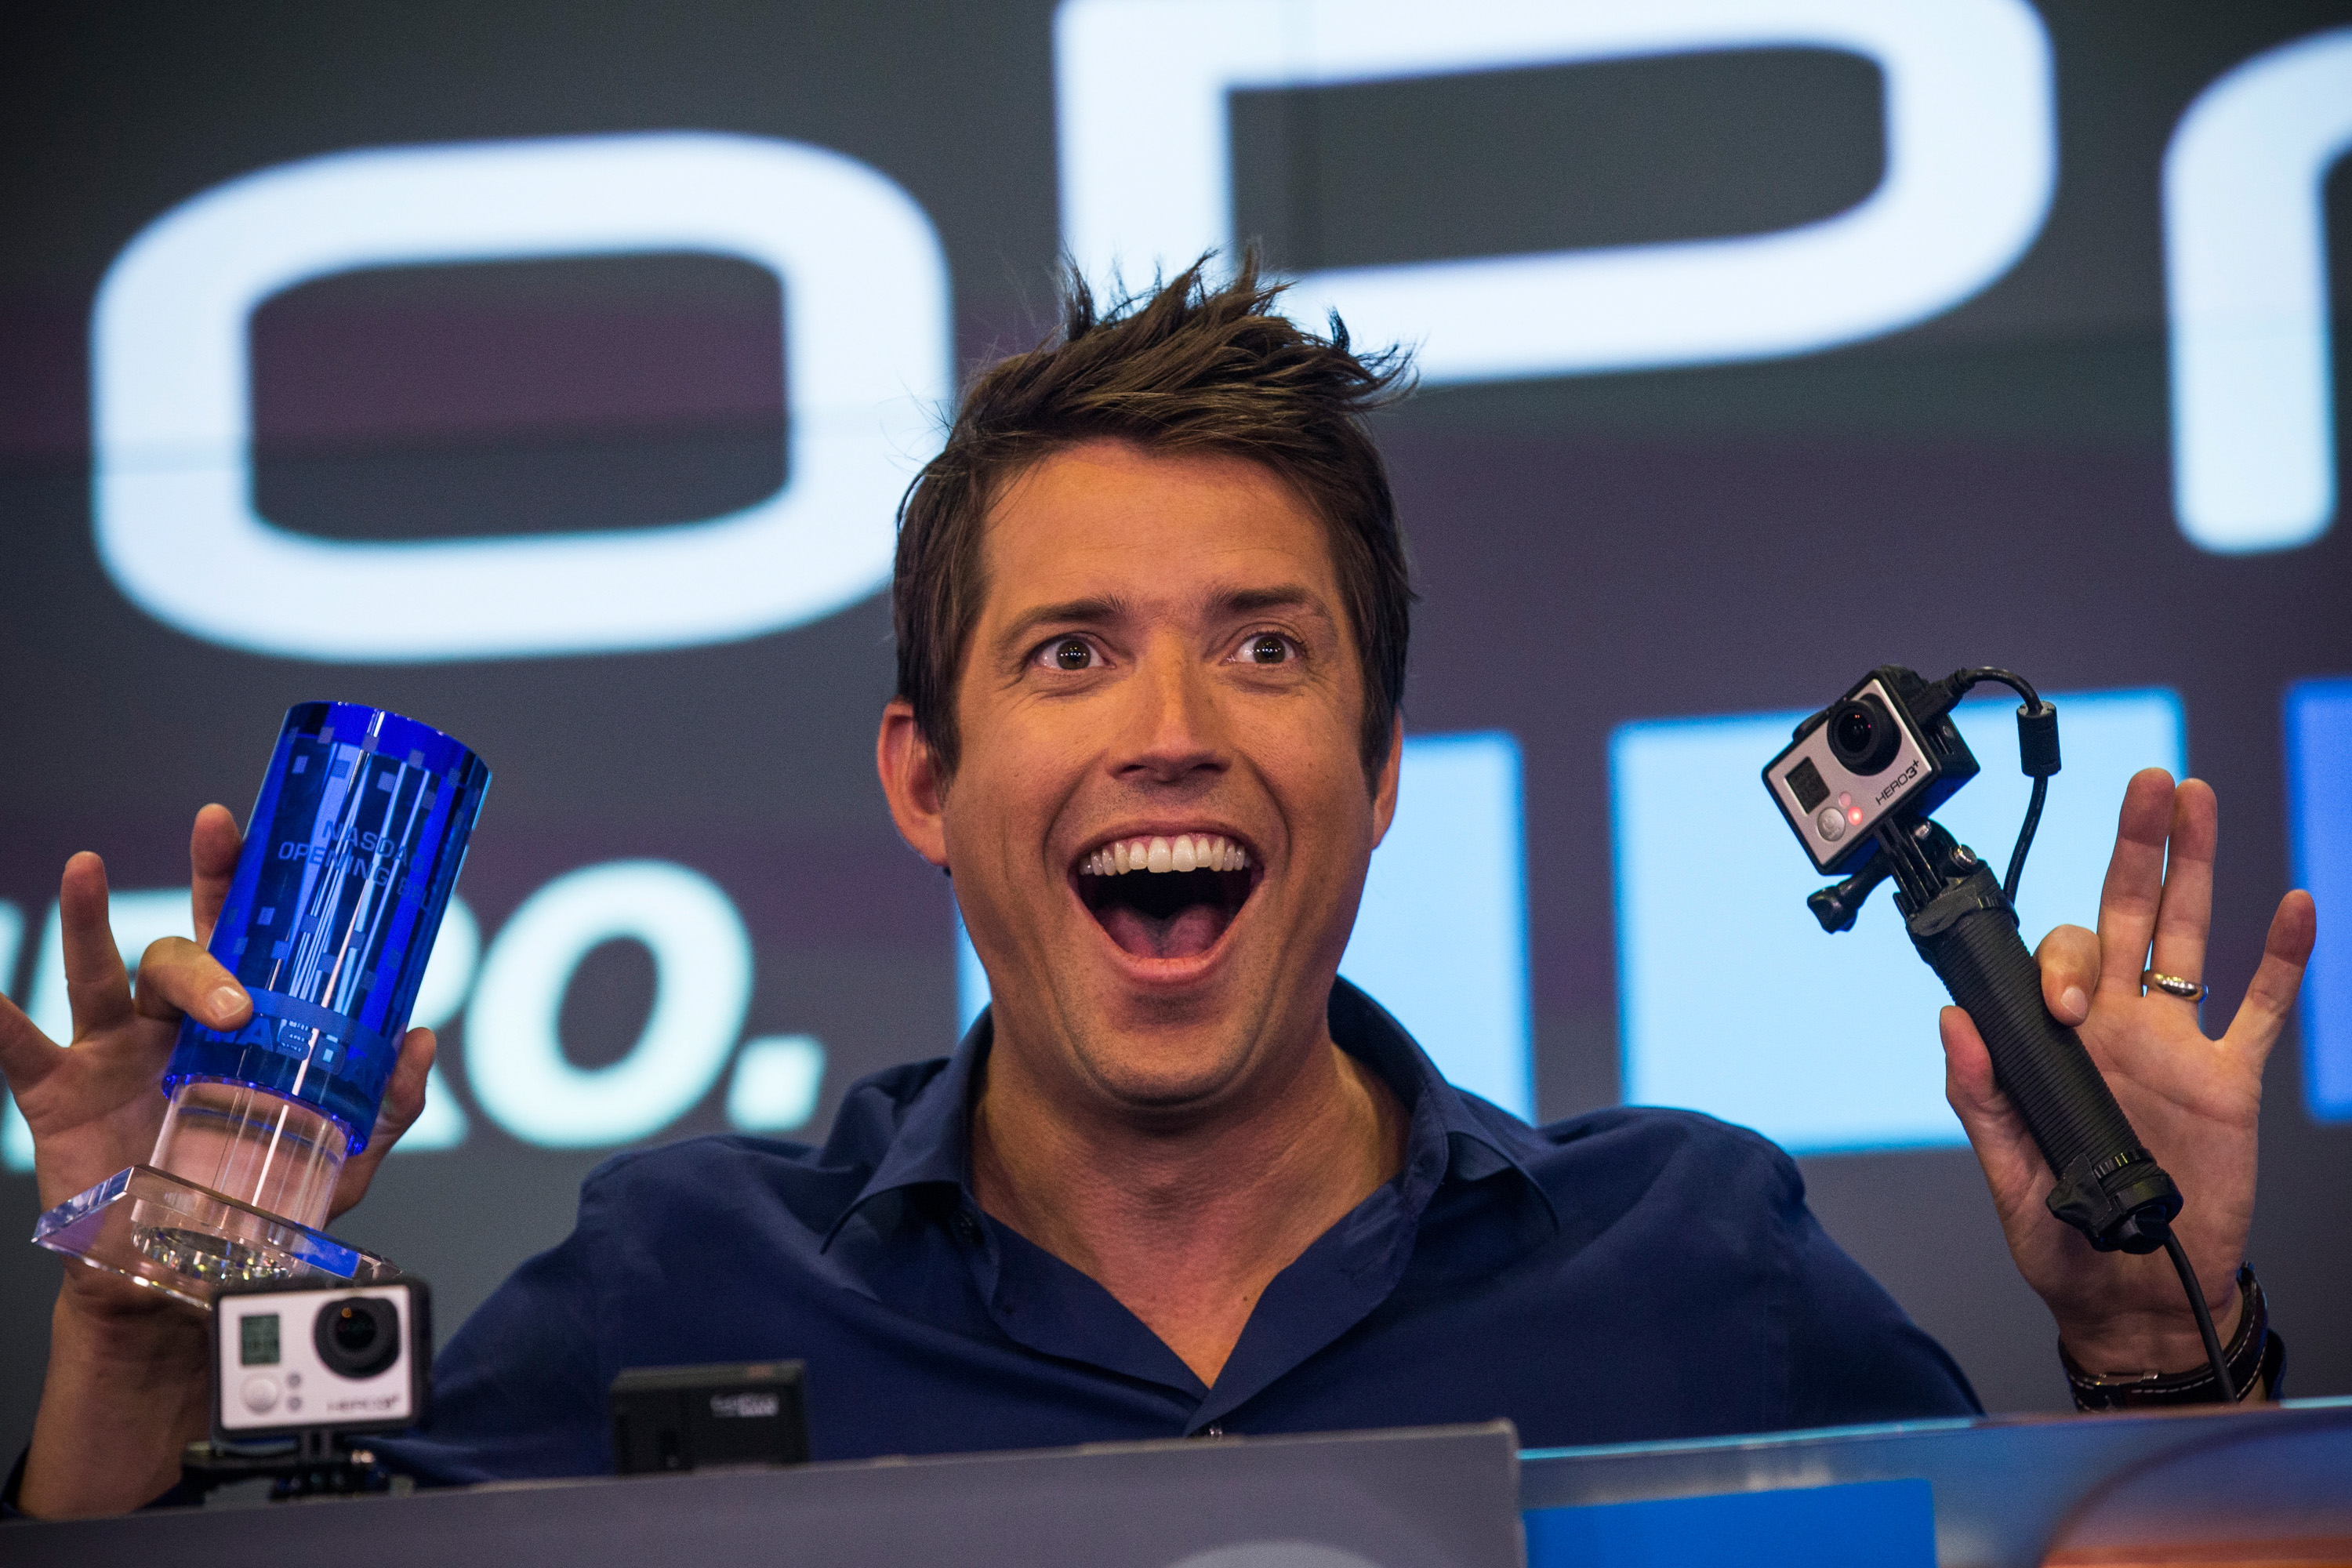 Nick Woodman, founder and CEO of GoPro speaks during the company's initial public offering (IPO) at the Nasdaq Stock Exchange on June 26, 2014 in New York City. (Andrew Burton&mdash;Getty Images)